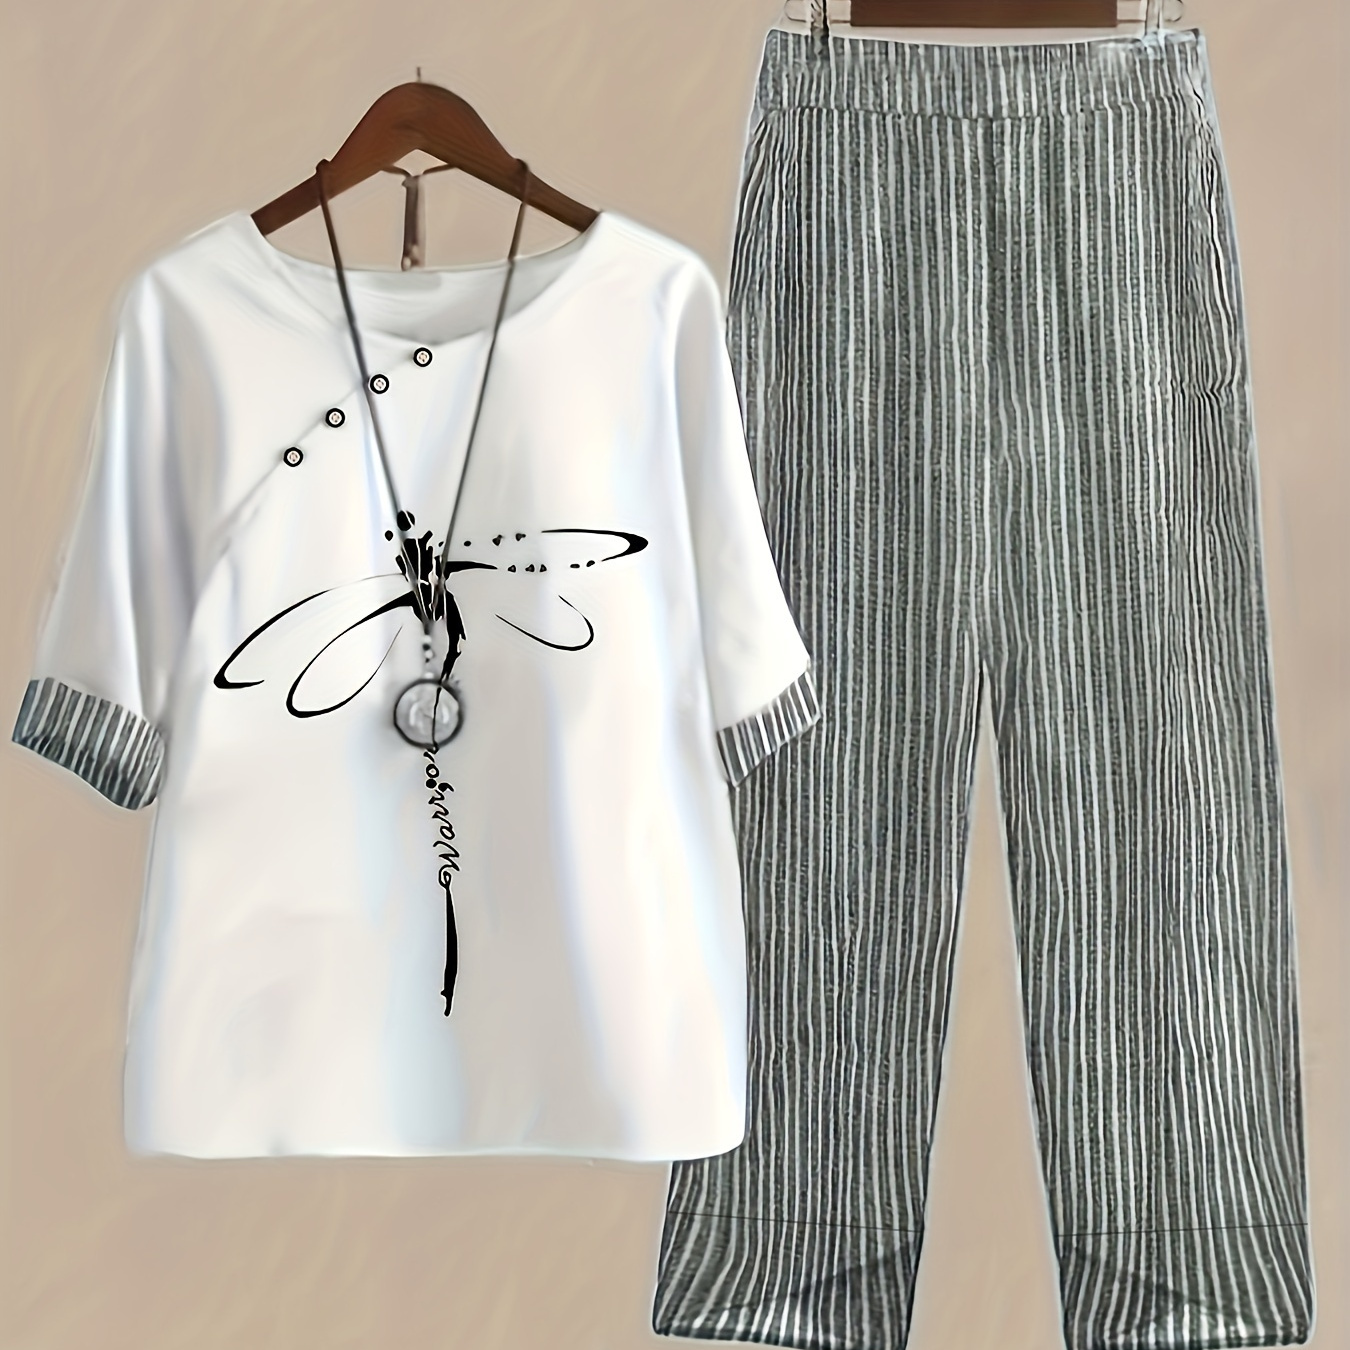 

Dragonfly & Stripe Print Two-piece Set, Contrast Trim Crew Neck Top & Baggy Pants Outfits, Women's Clothing